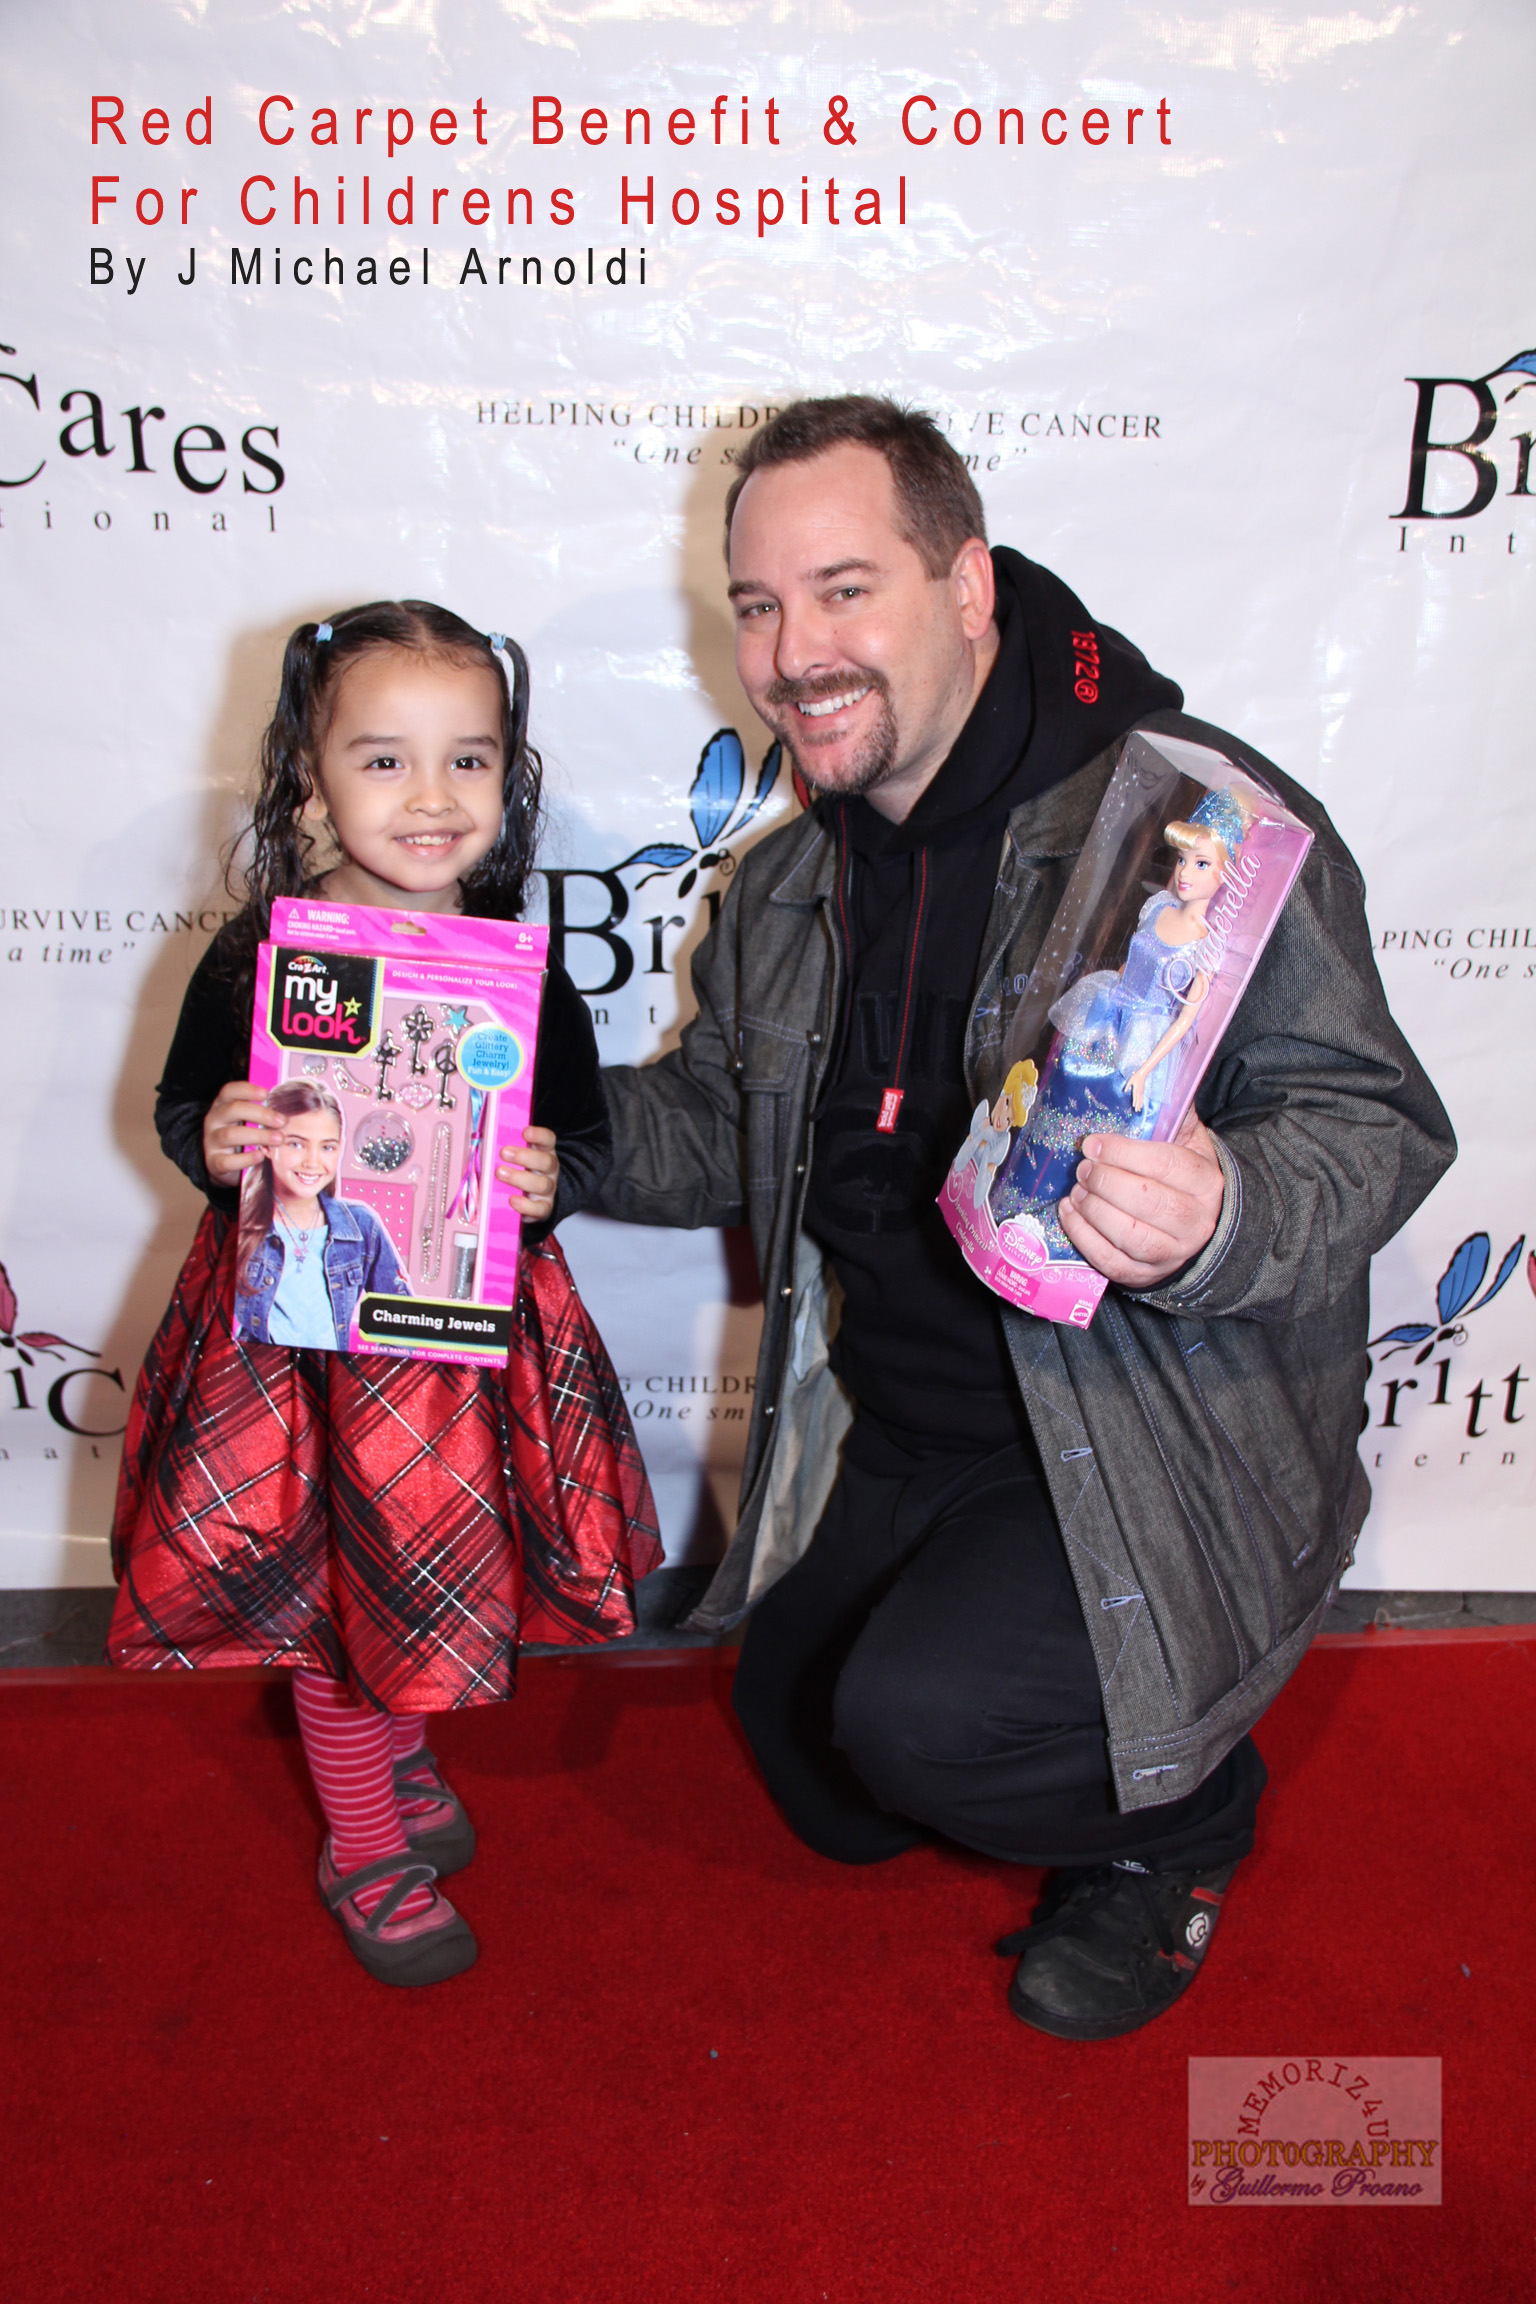 2012 Toy Drive Benefit at Infusion Lounge. With daughter Marley Schaefer.